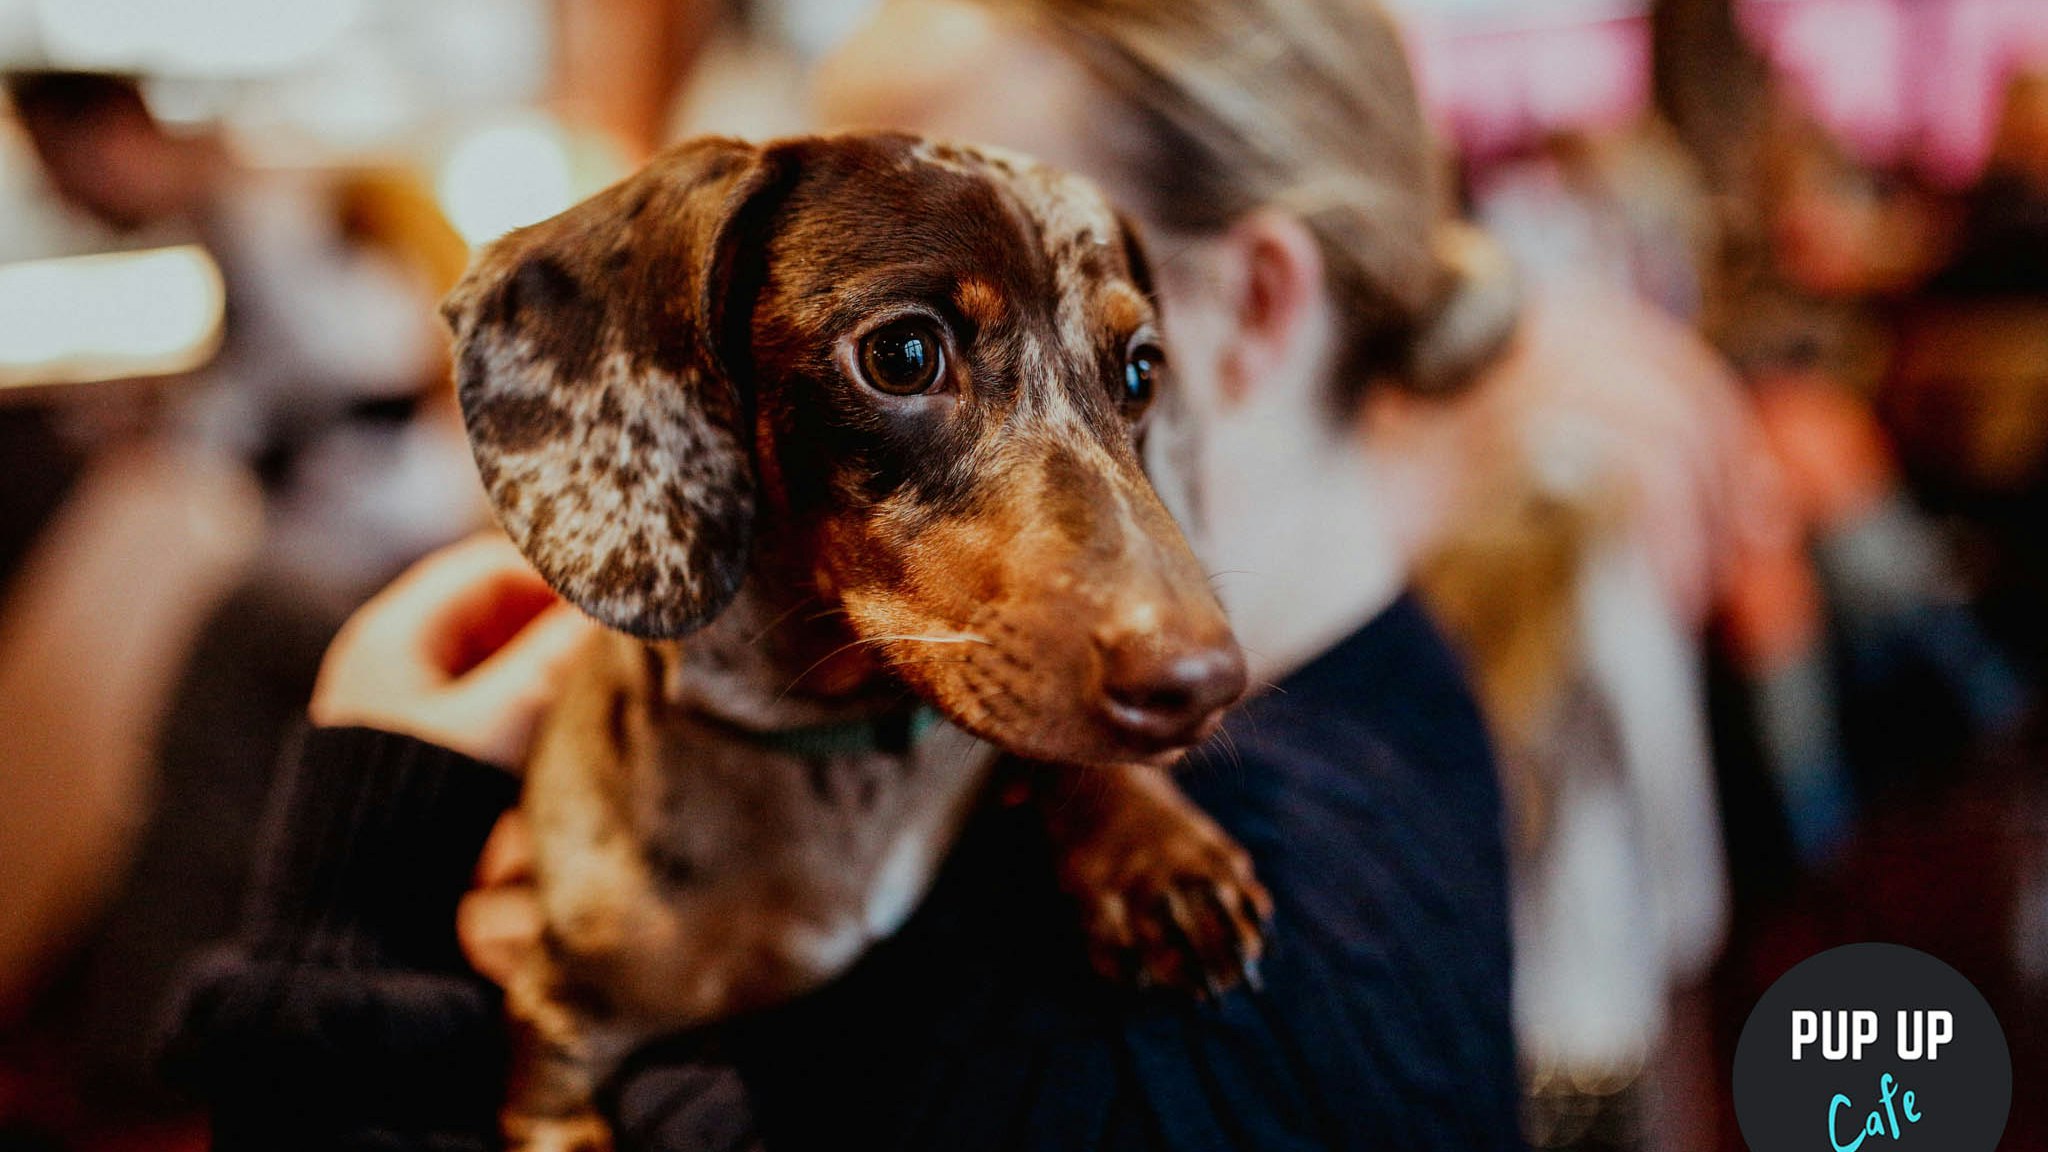 Dachshund Pup Up Cafe – Reading